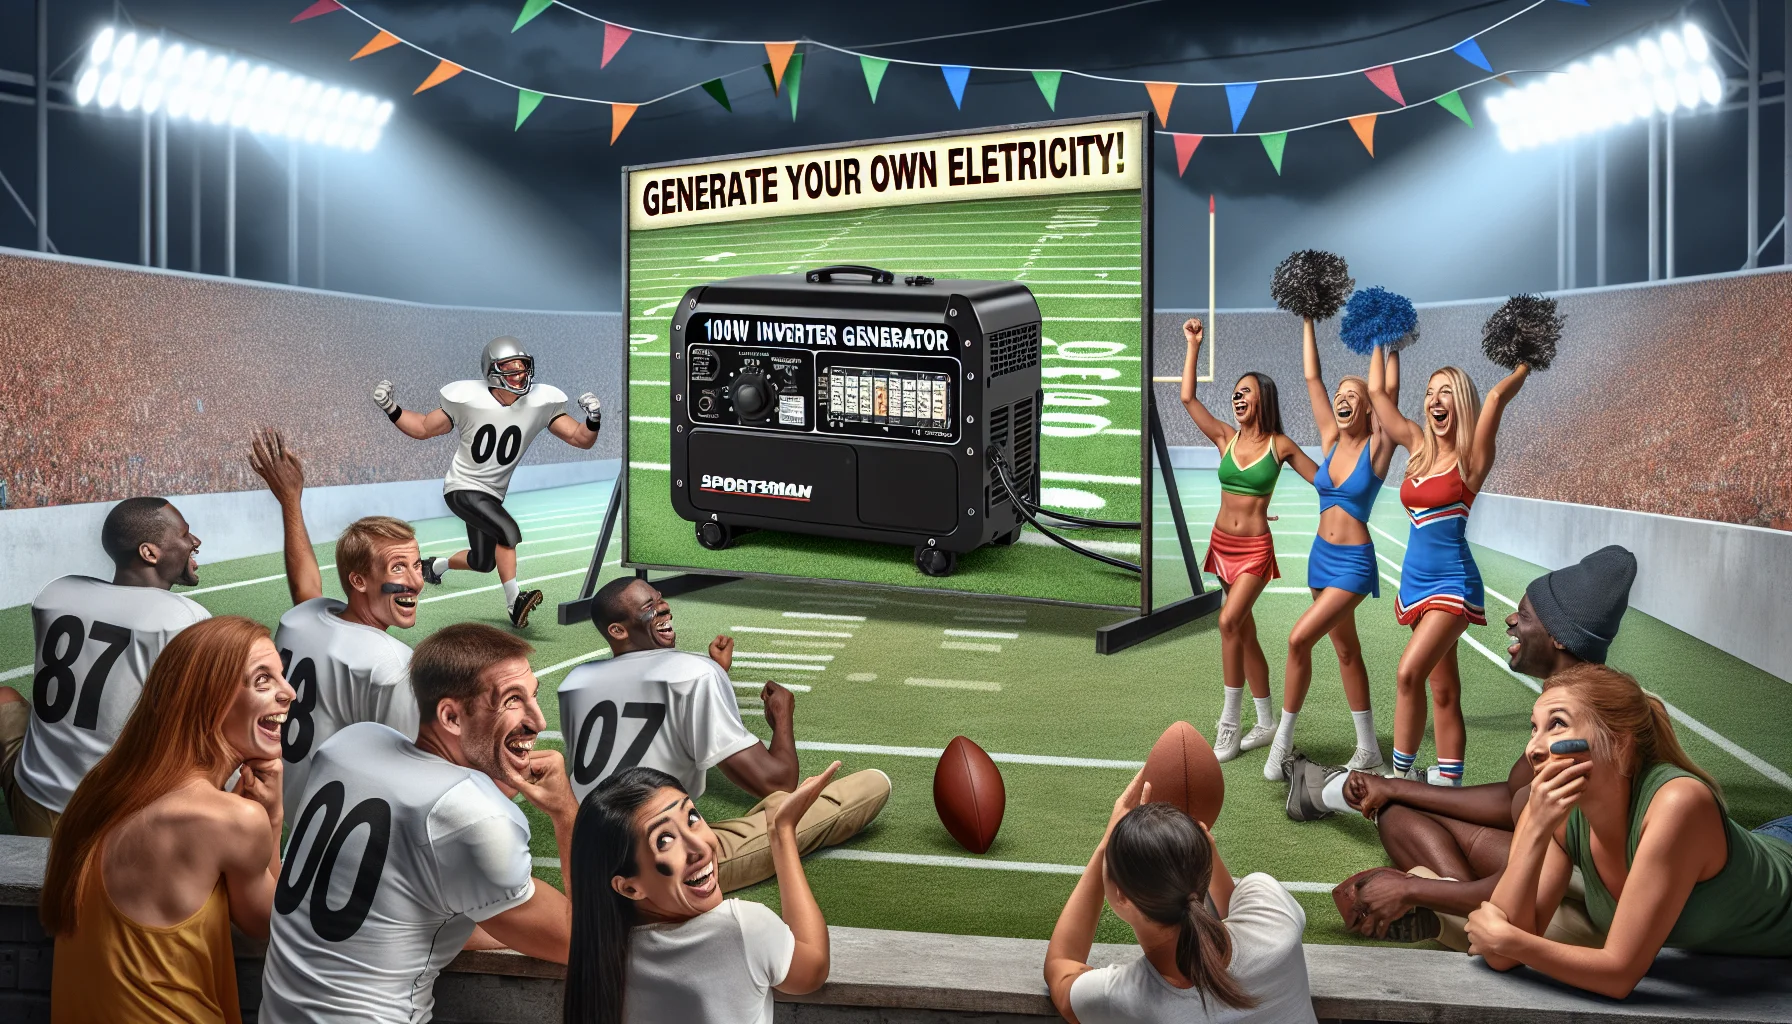 Imagine a humorous scenario displaying a 1000W inverter generator at a sports event. Picture a large, black 1000W Sportsman inverter generator on a football field, powering a large electronic scoreboard. Below, a gathering of Caucasian and Hispanic football players, male and female, laugh as they attempt to play a game by the flickering scoreboard light. Meanwhile, a Middle-eastern and Black woman act as cheerleaders, enthusiastically promoting the power of the generator across the stadium. The scene includes a colorful banner overhead reading 'Generate your own electricity!'